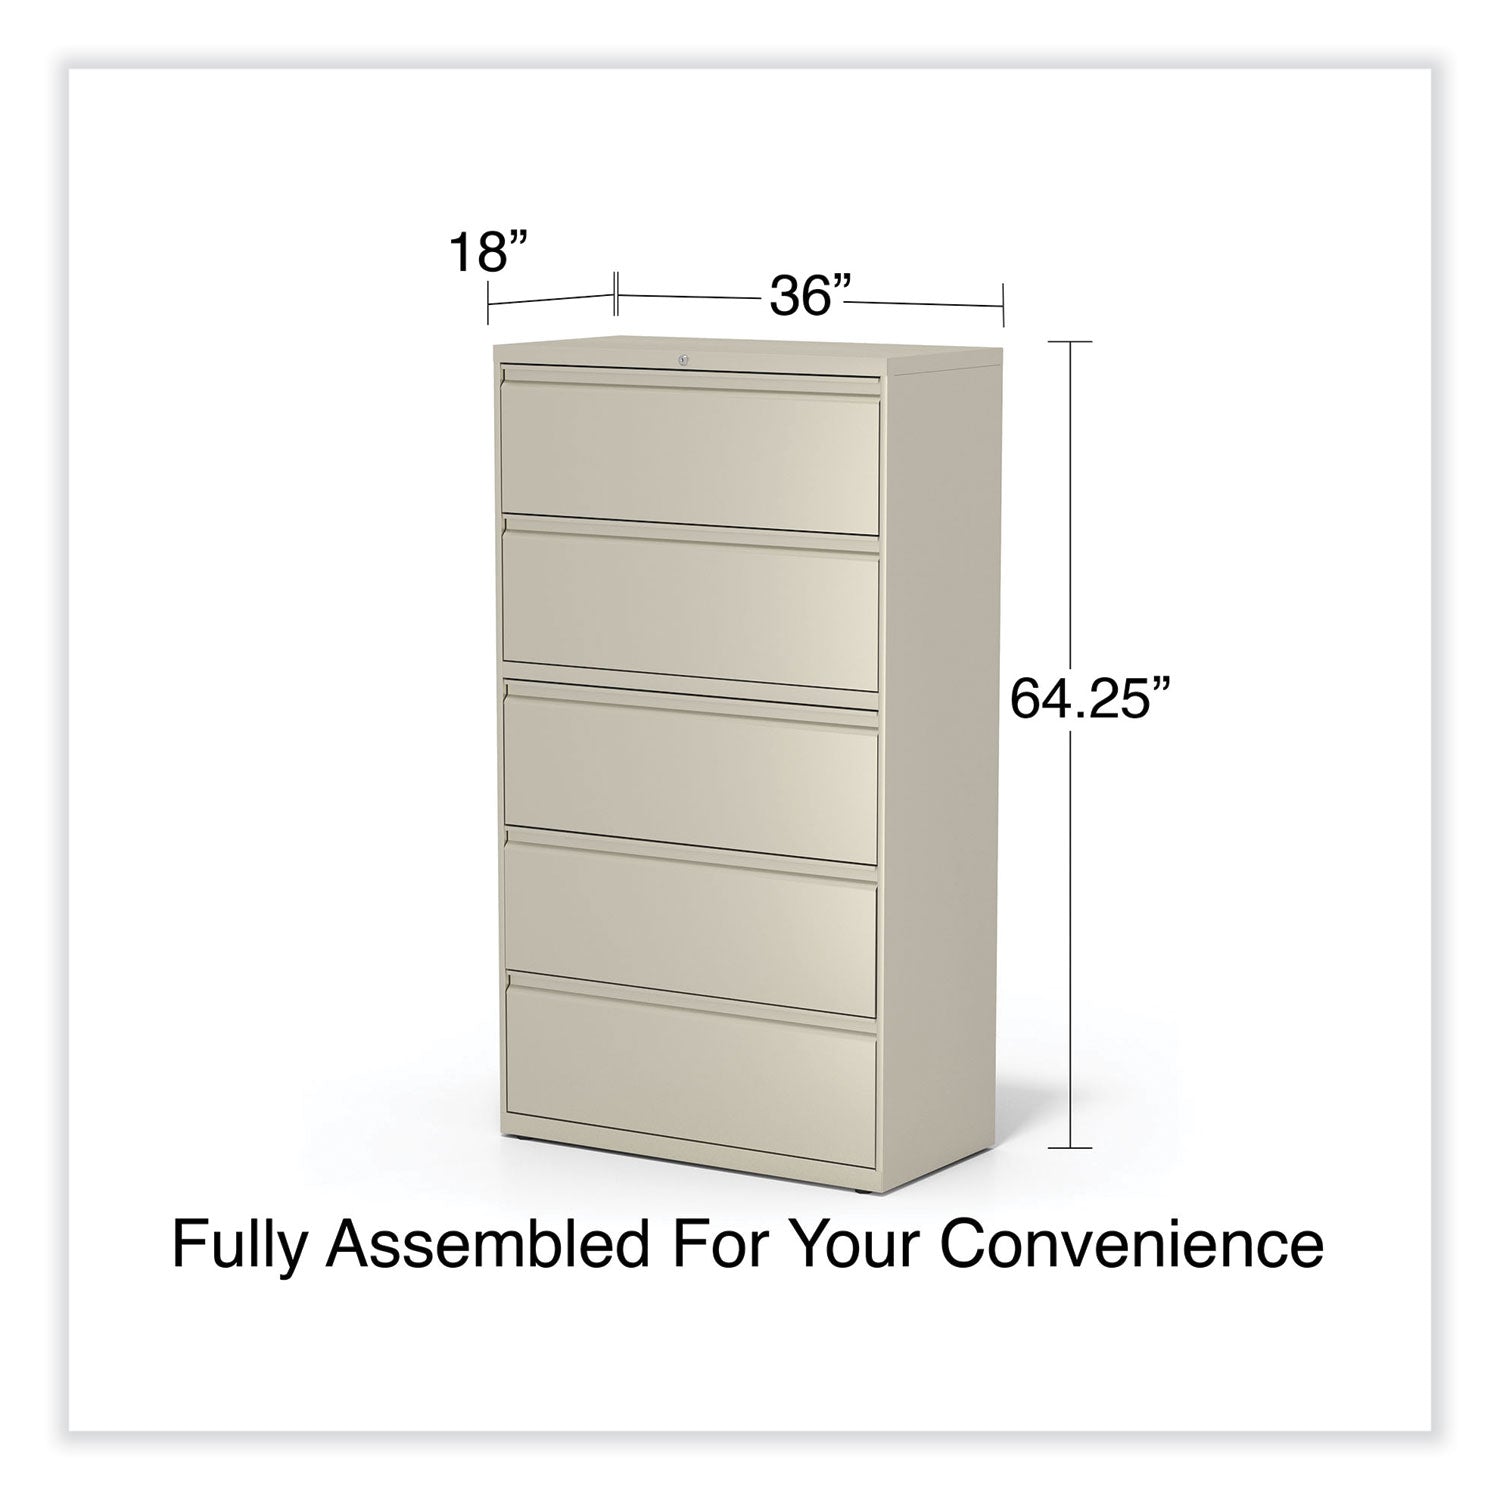 lateral-file-5-legal-letter-a4-a5-size-file-drawers-putty-36-x-1863-x-6763_alehlf3667py - 6